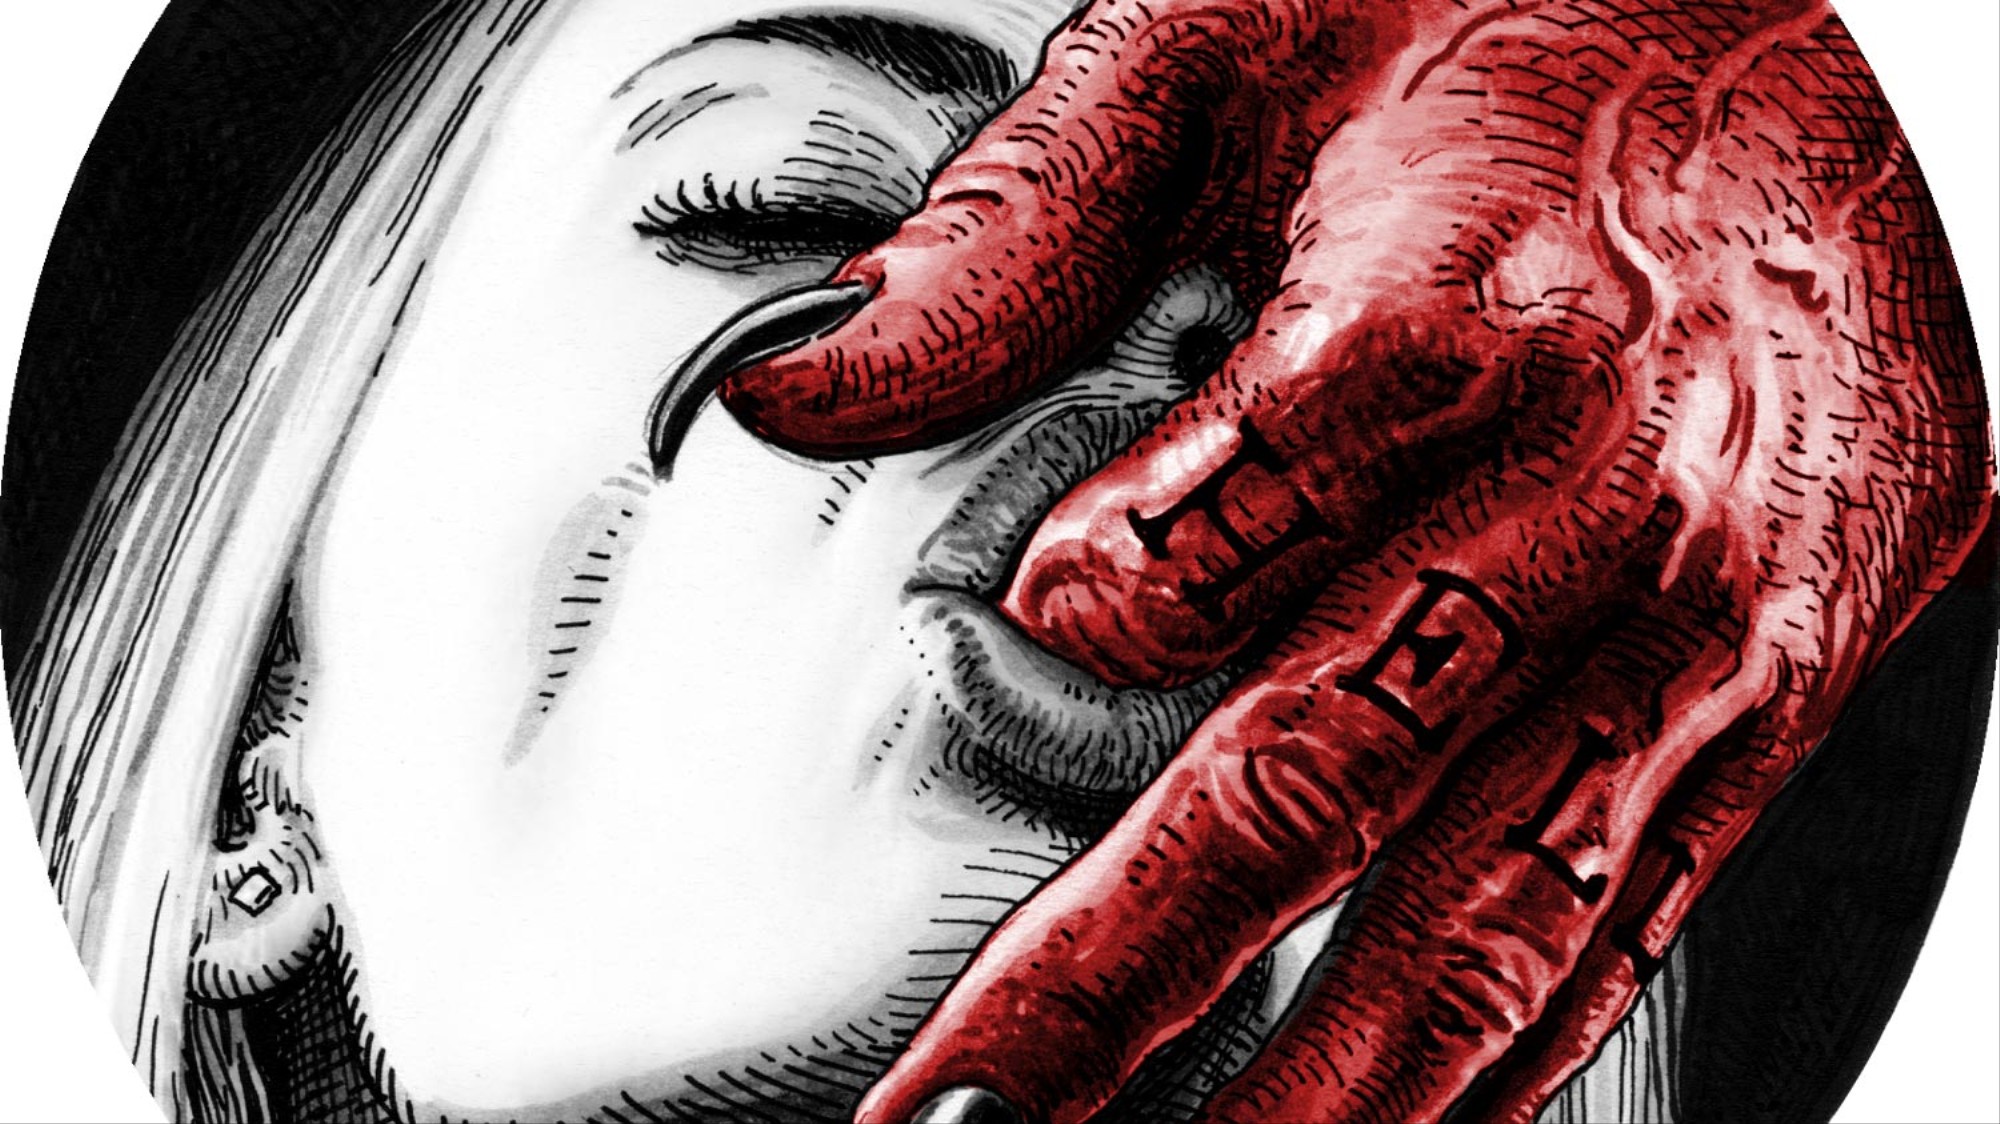 Porn Satanic Artwork - NSFW] These Devilish Illustrations Are Sinfully Sexy - VICE